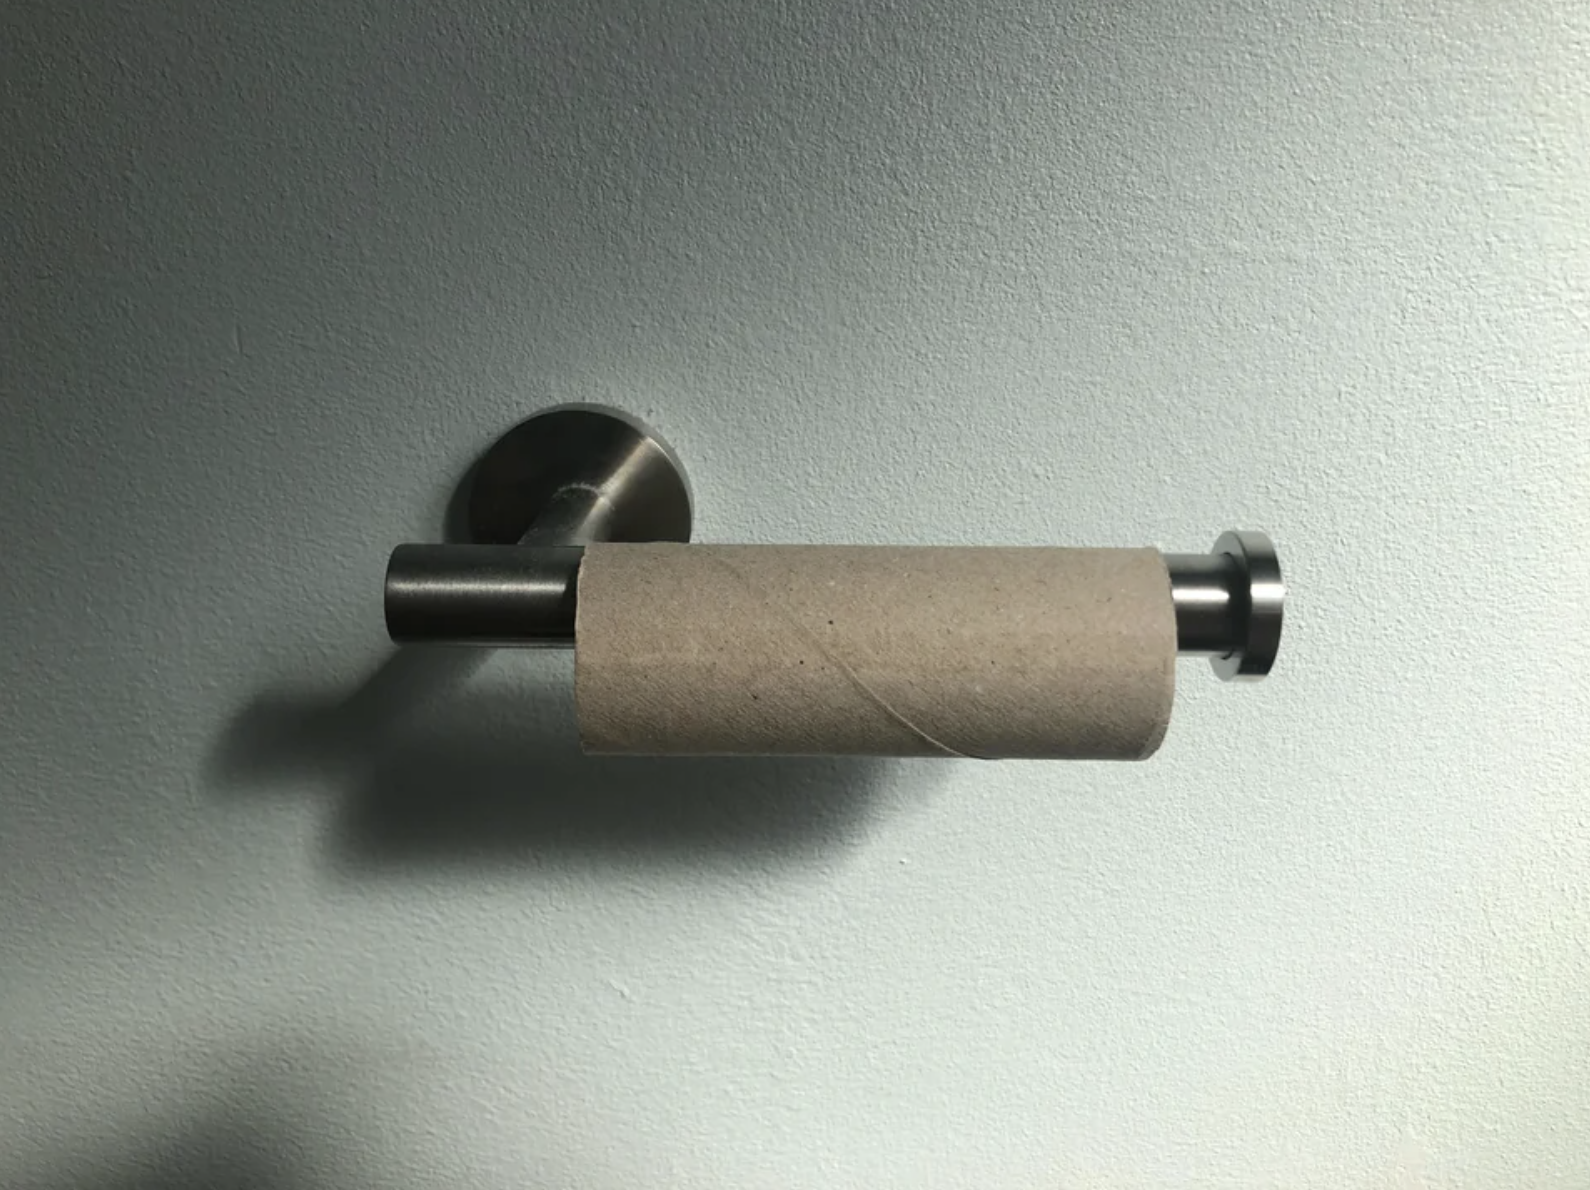 An empty roll of toilet paper has been left on the holder, and the picture has been taken from the angle of someone sitting on the toilet